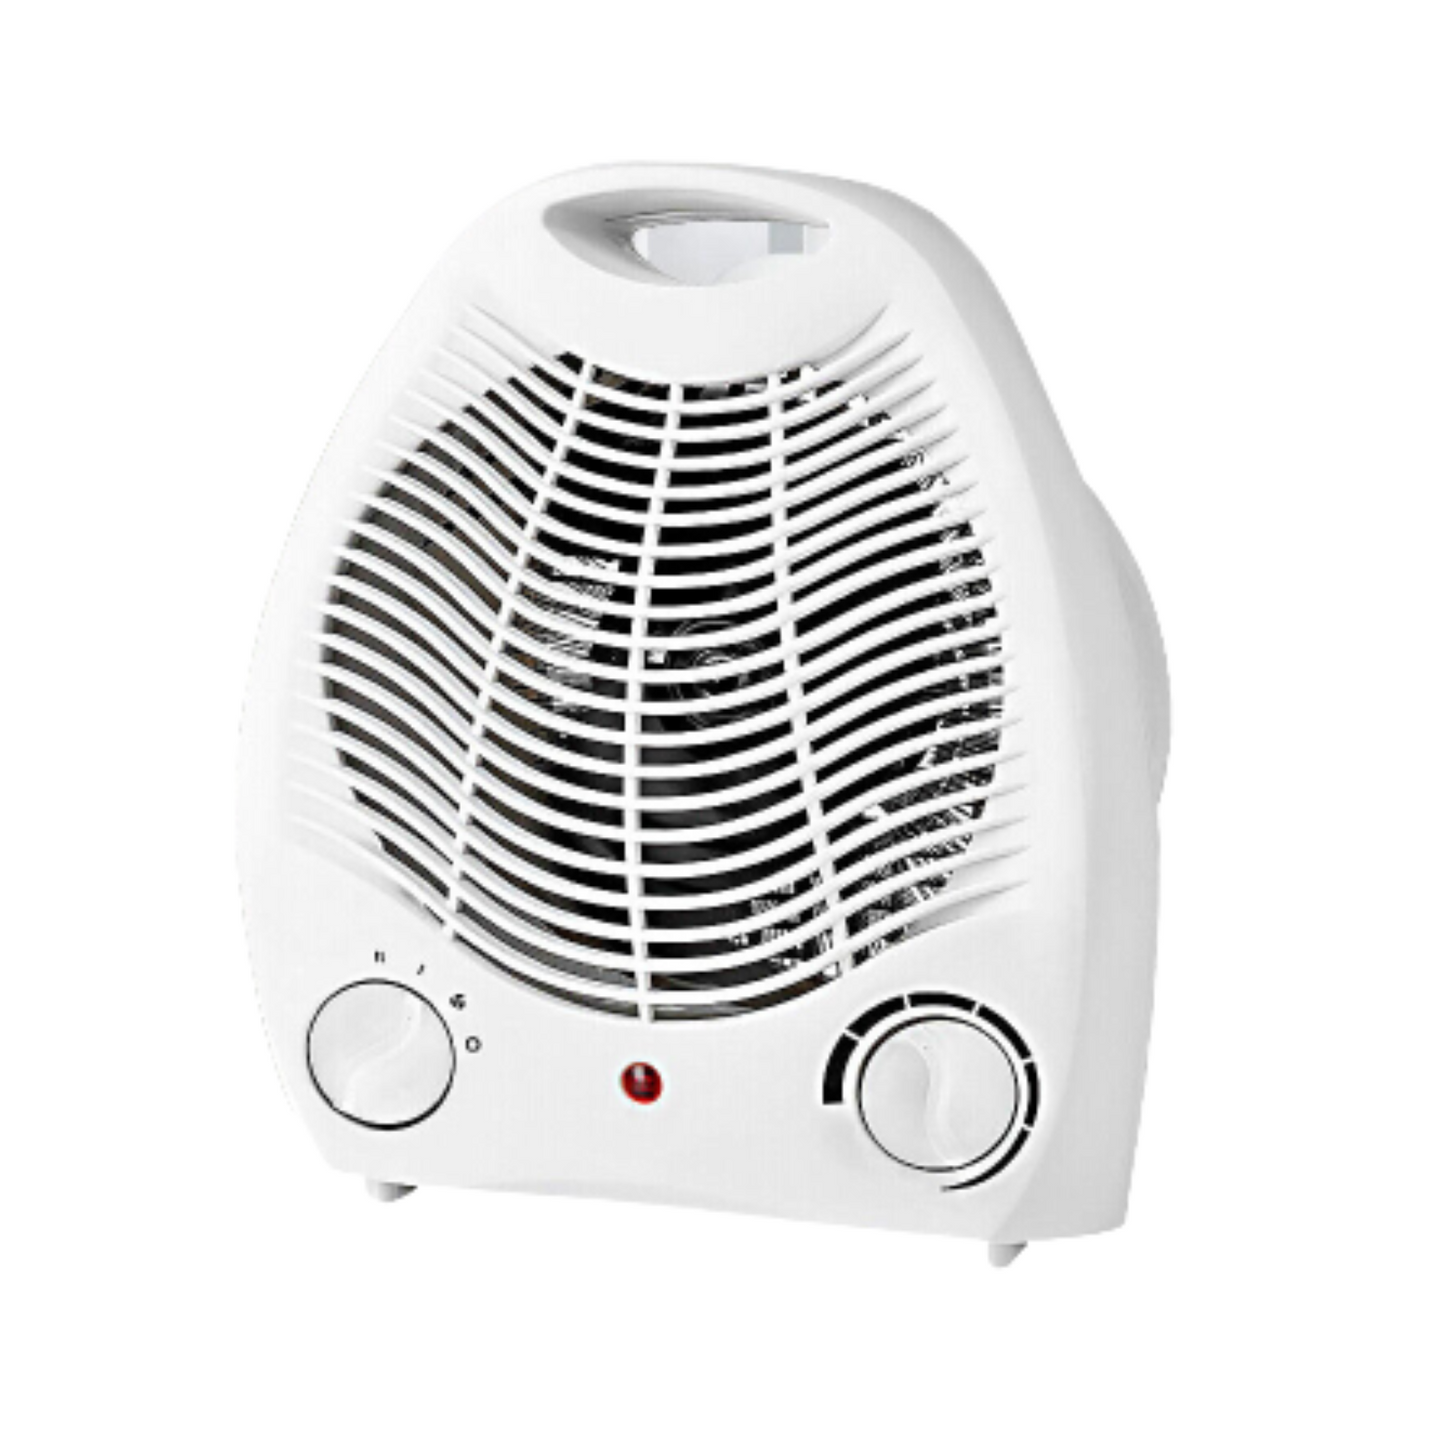 Electric Fan Heater 2000W Upright Adjustable Thermostat Room Floor Home